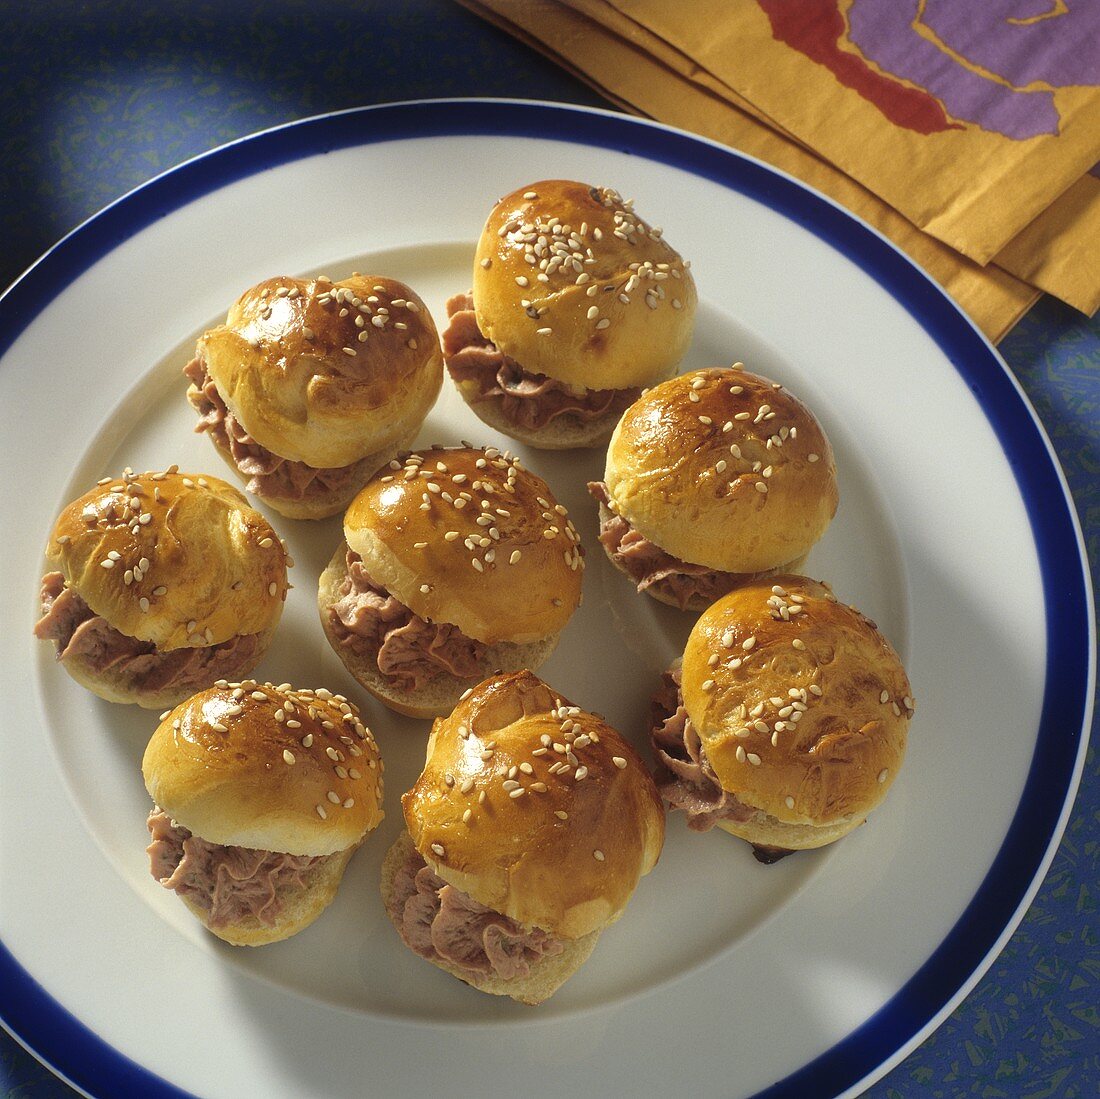 Small Cocktail Sandwiches with Liver Sausage on Plates